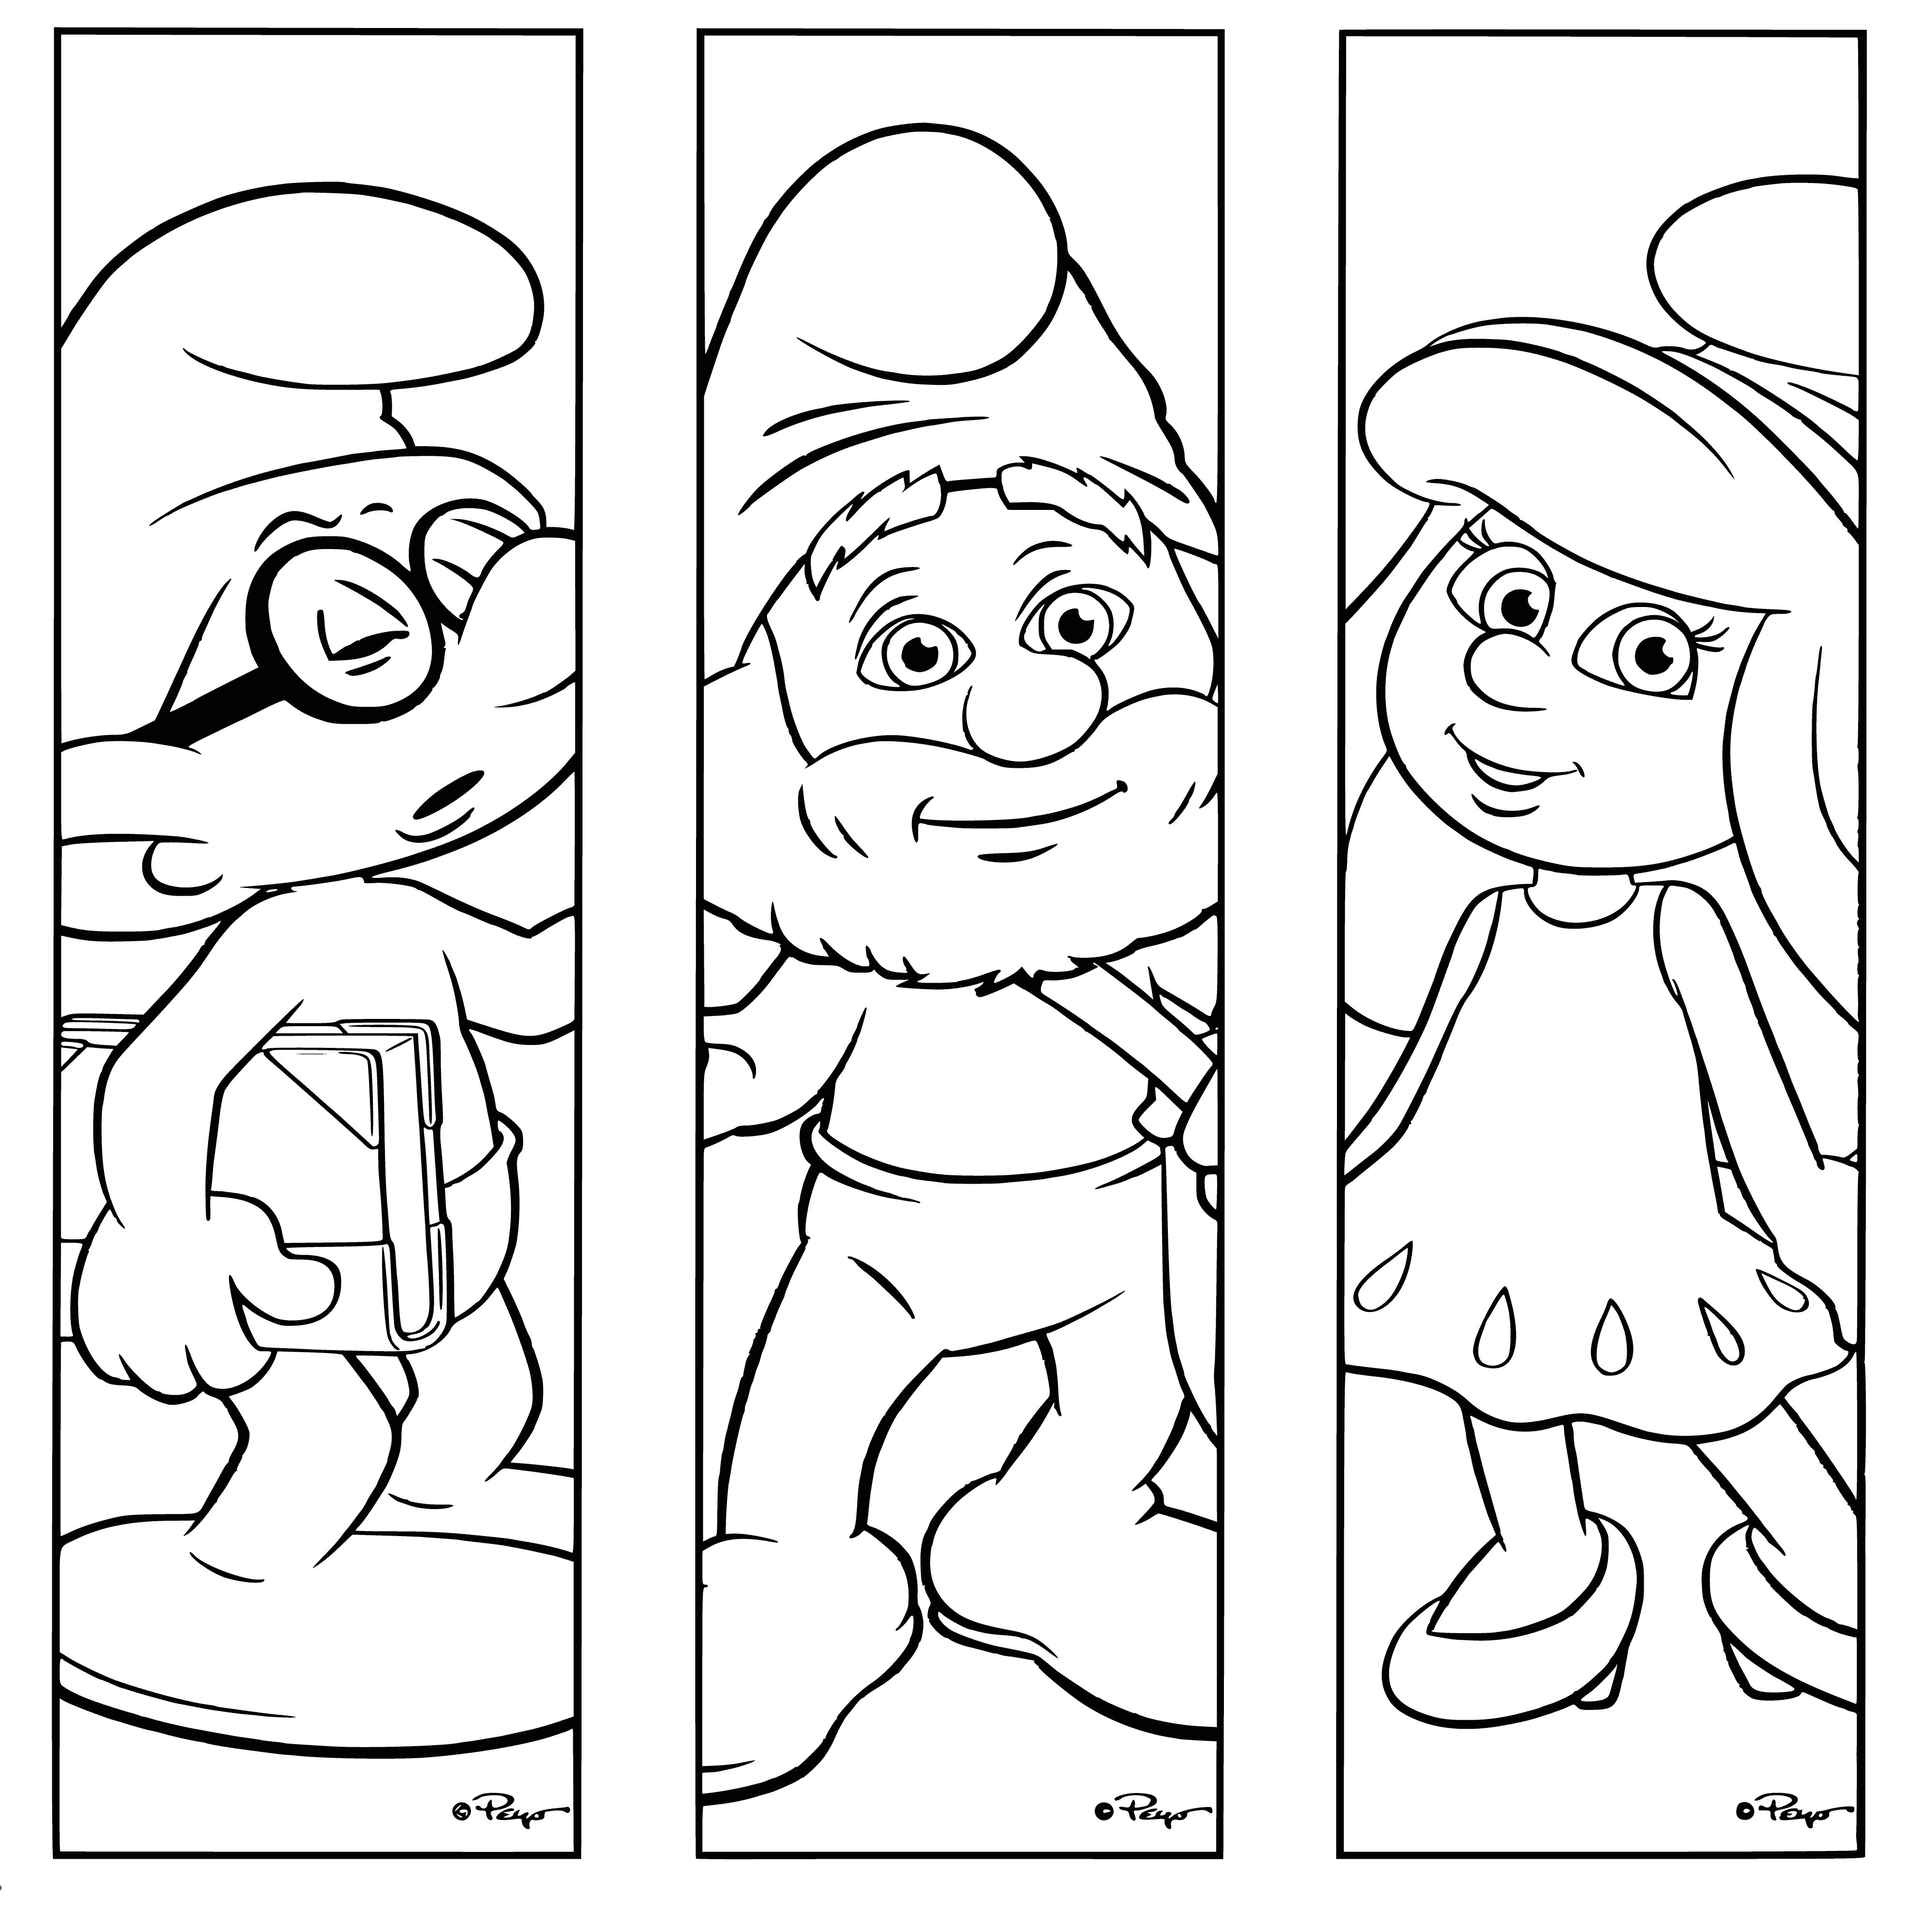 coloring page: Bookmarks feature #Smurfs from 1981 Hanna-Barbera series. Papa Smurf, Brainy, Hefty & Smurfette colored paged with blue skin, white trousers & red hat.